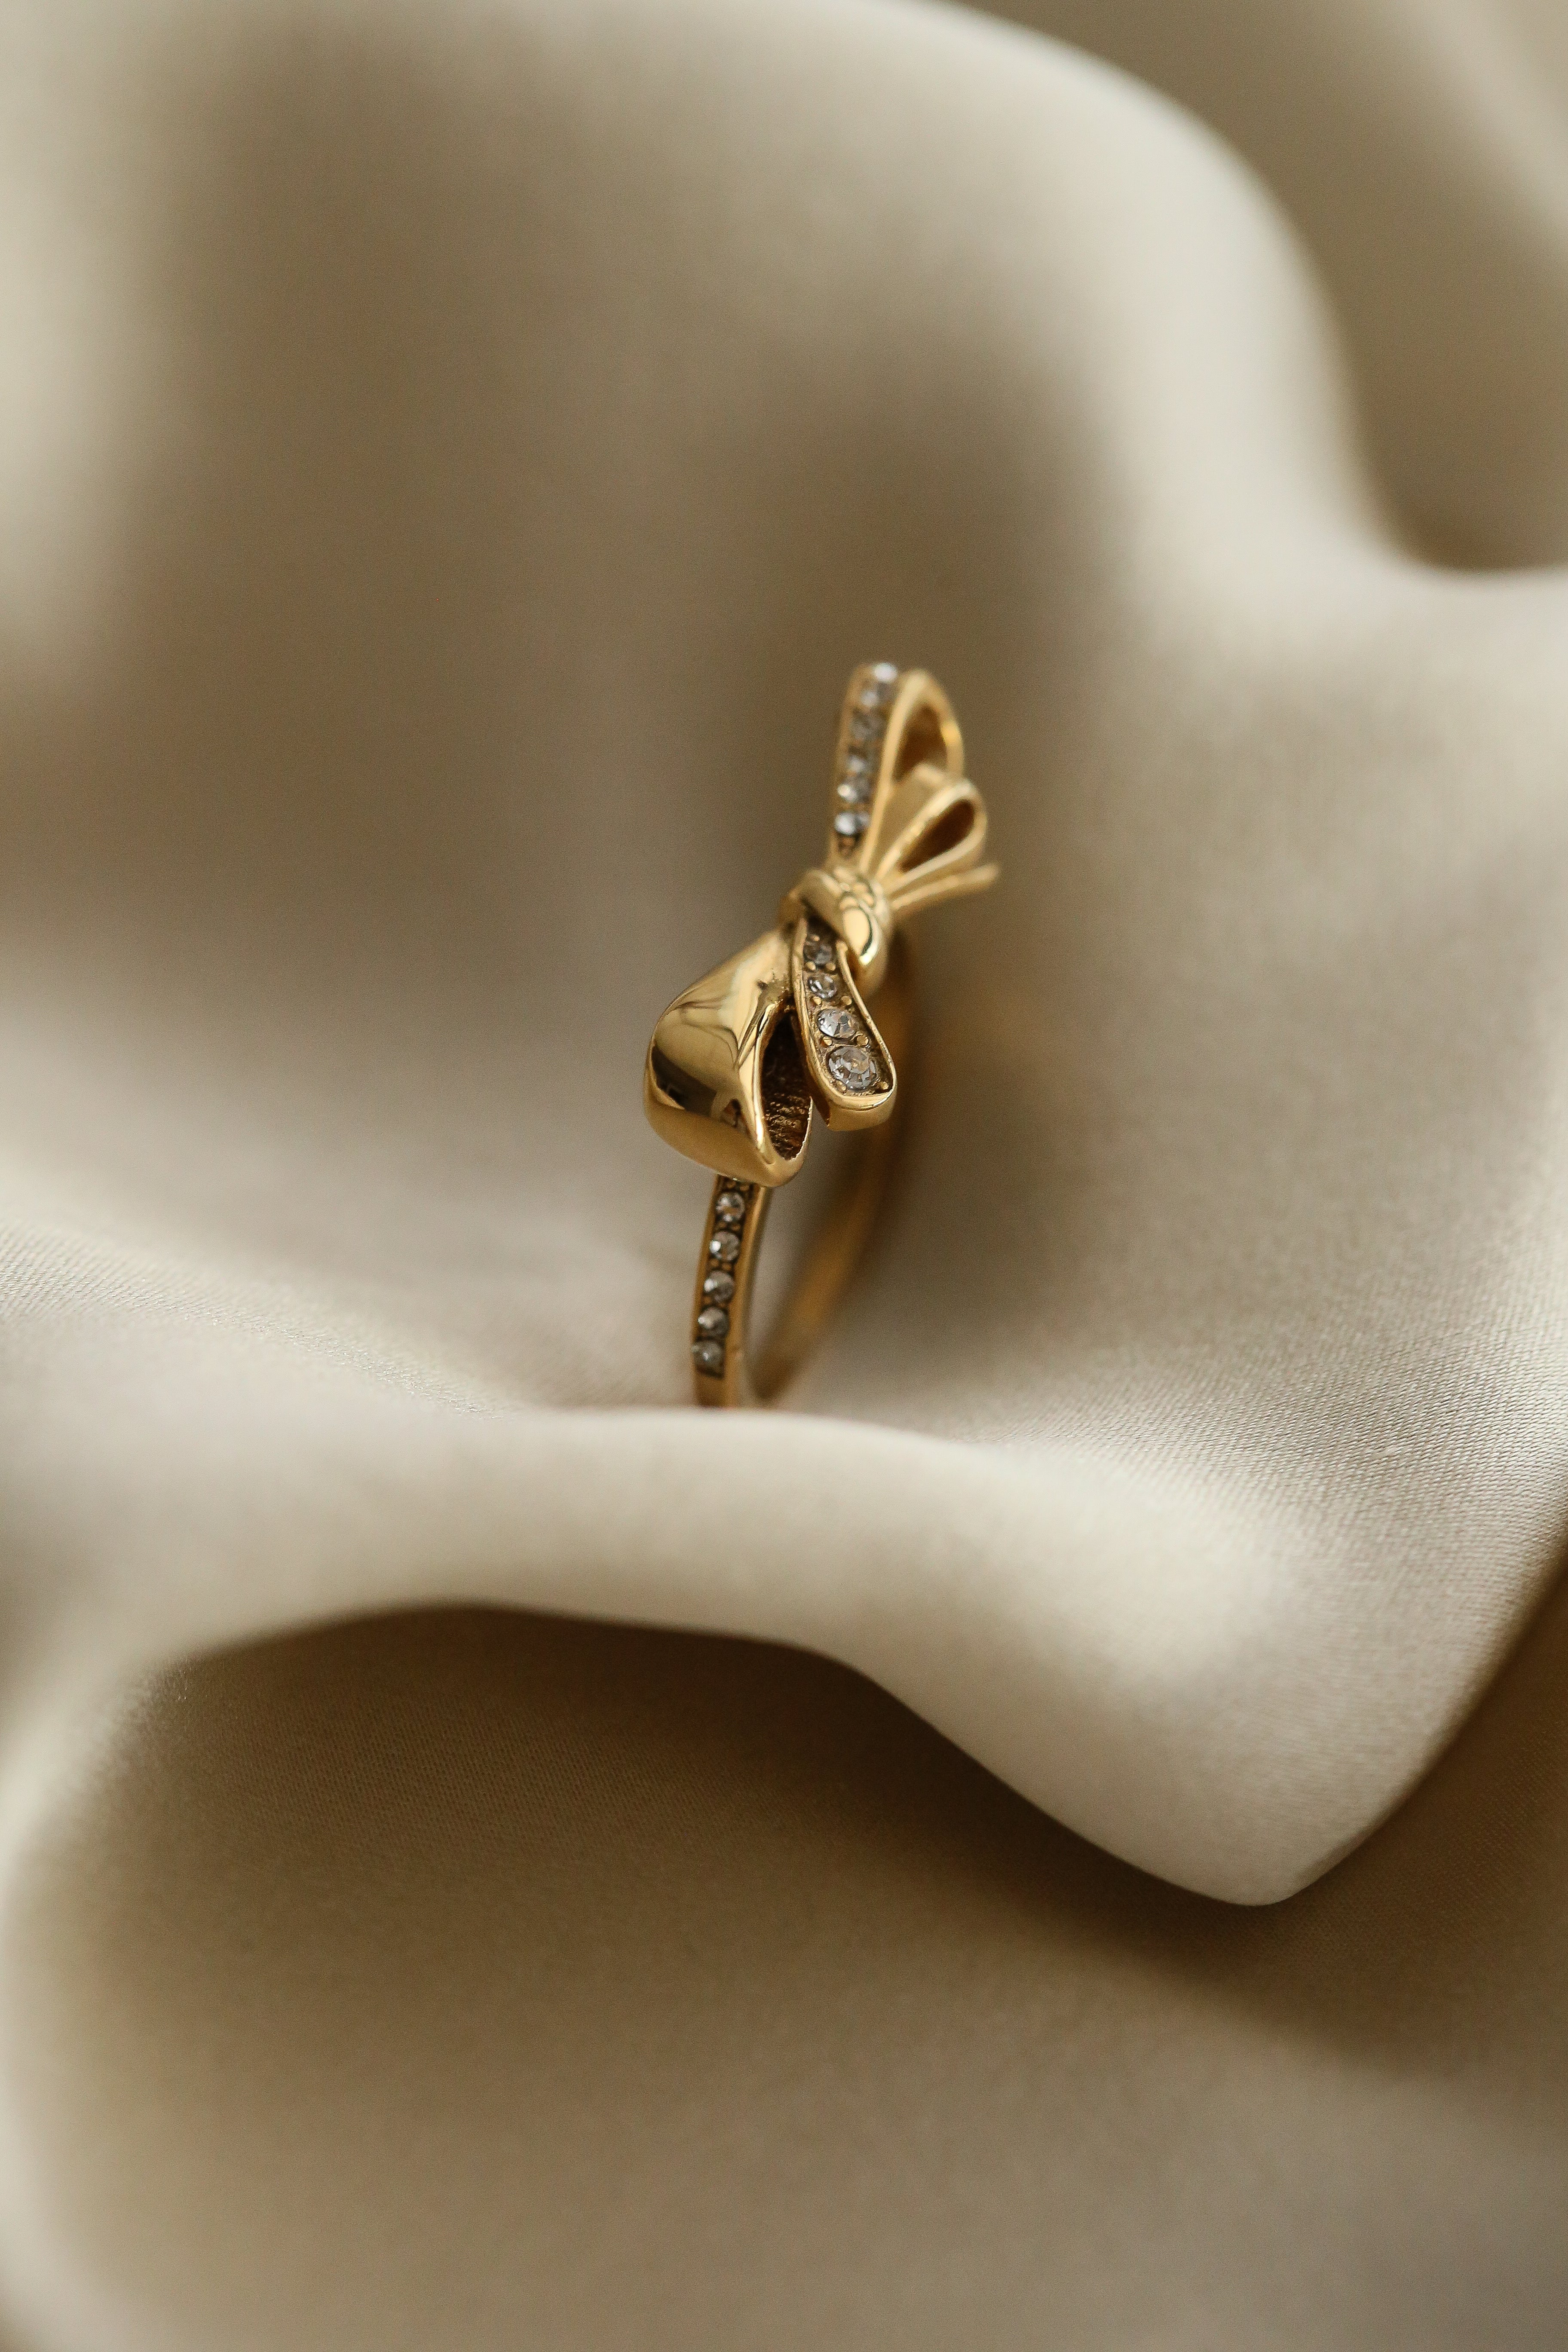 Jewel Ring - Boutique Minimaliste has waterproof, durable, elegant and vintage inspired jewelry